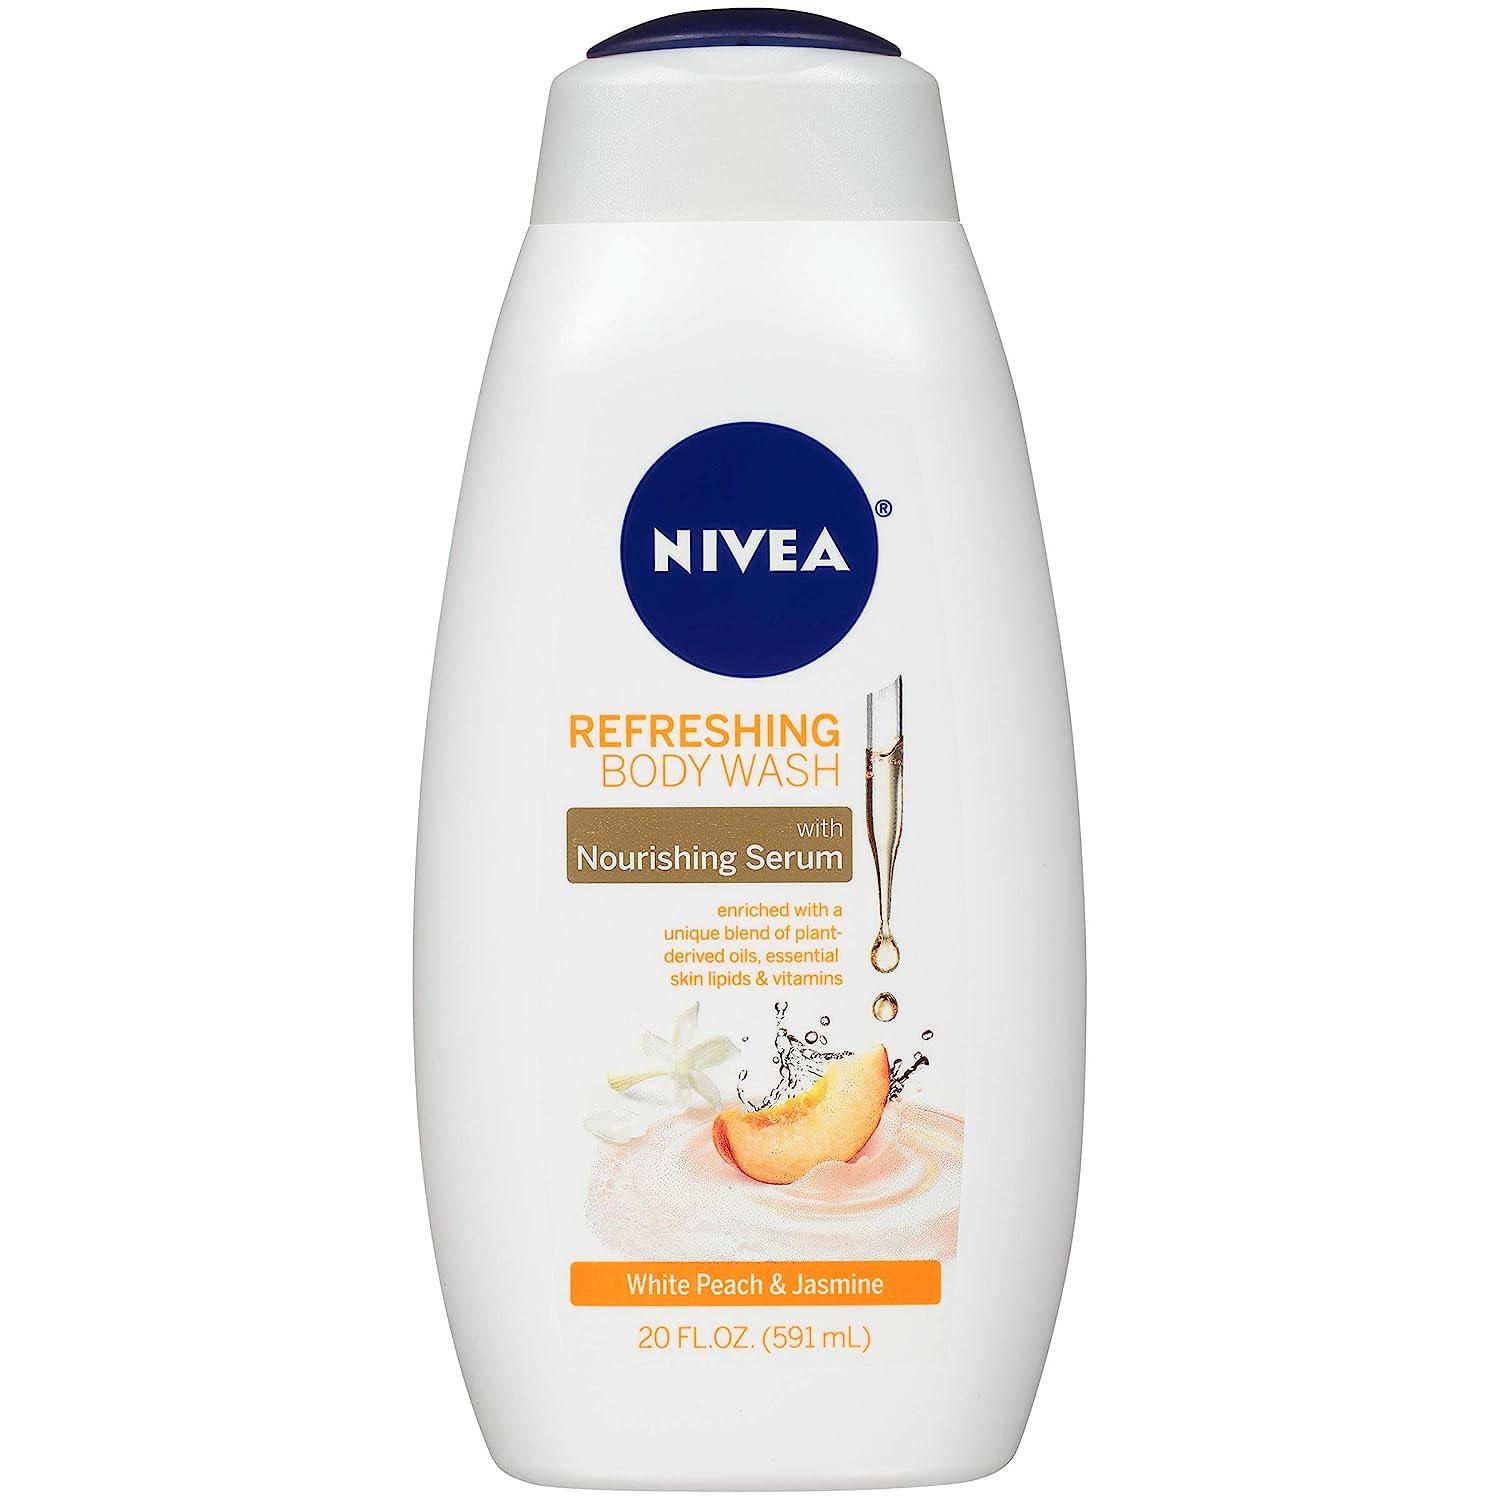 Nivea White Peach and Jasmine Body Wash with $0.80 Credit for $3.83